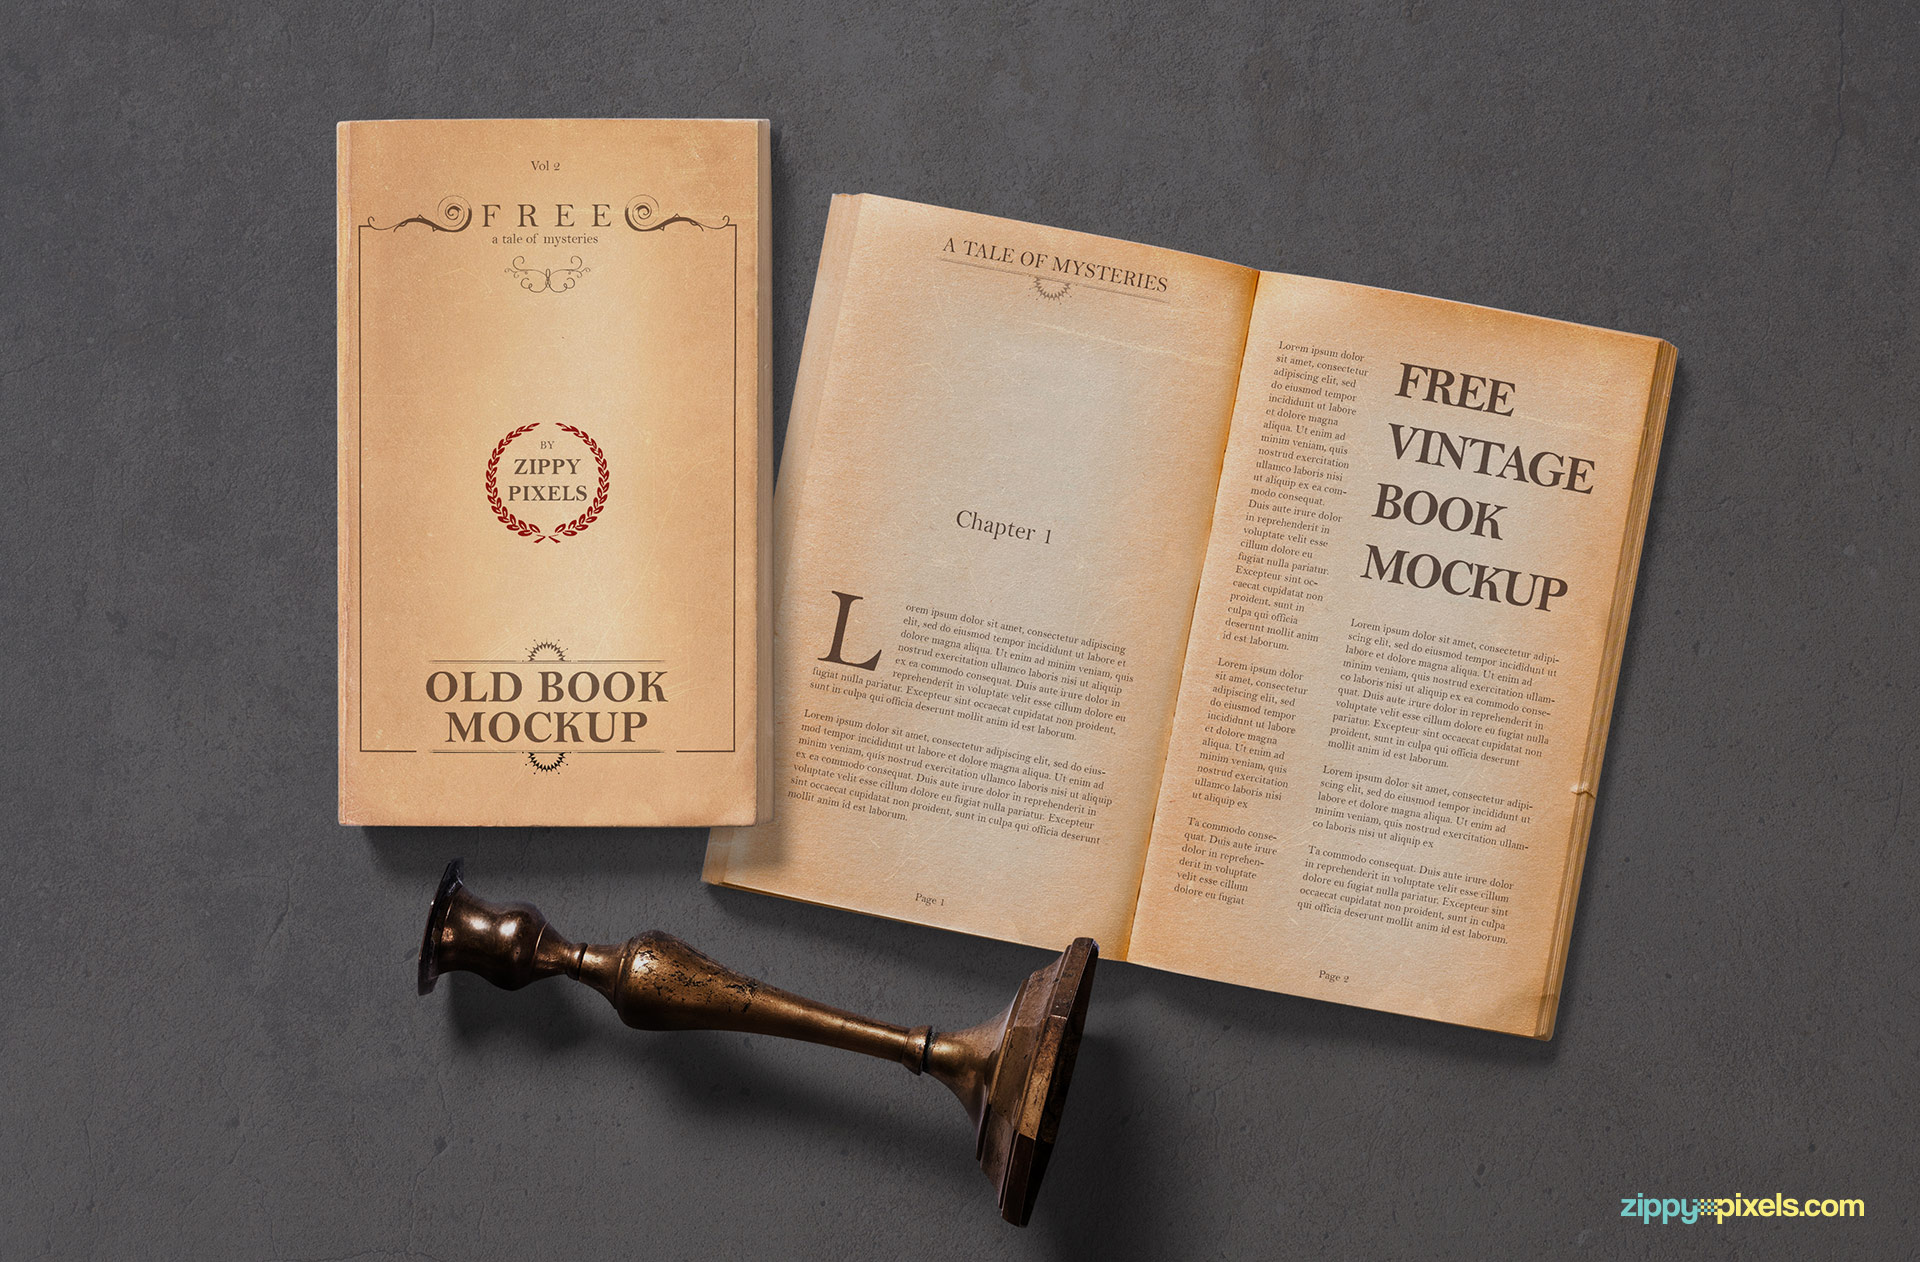 An old book mockup open alongside its cover with an antique brass candleholder on a textured grey background, highlighting a classic literary presentation.